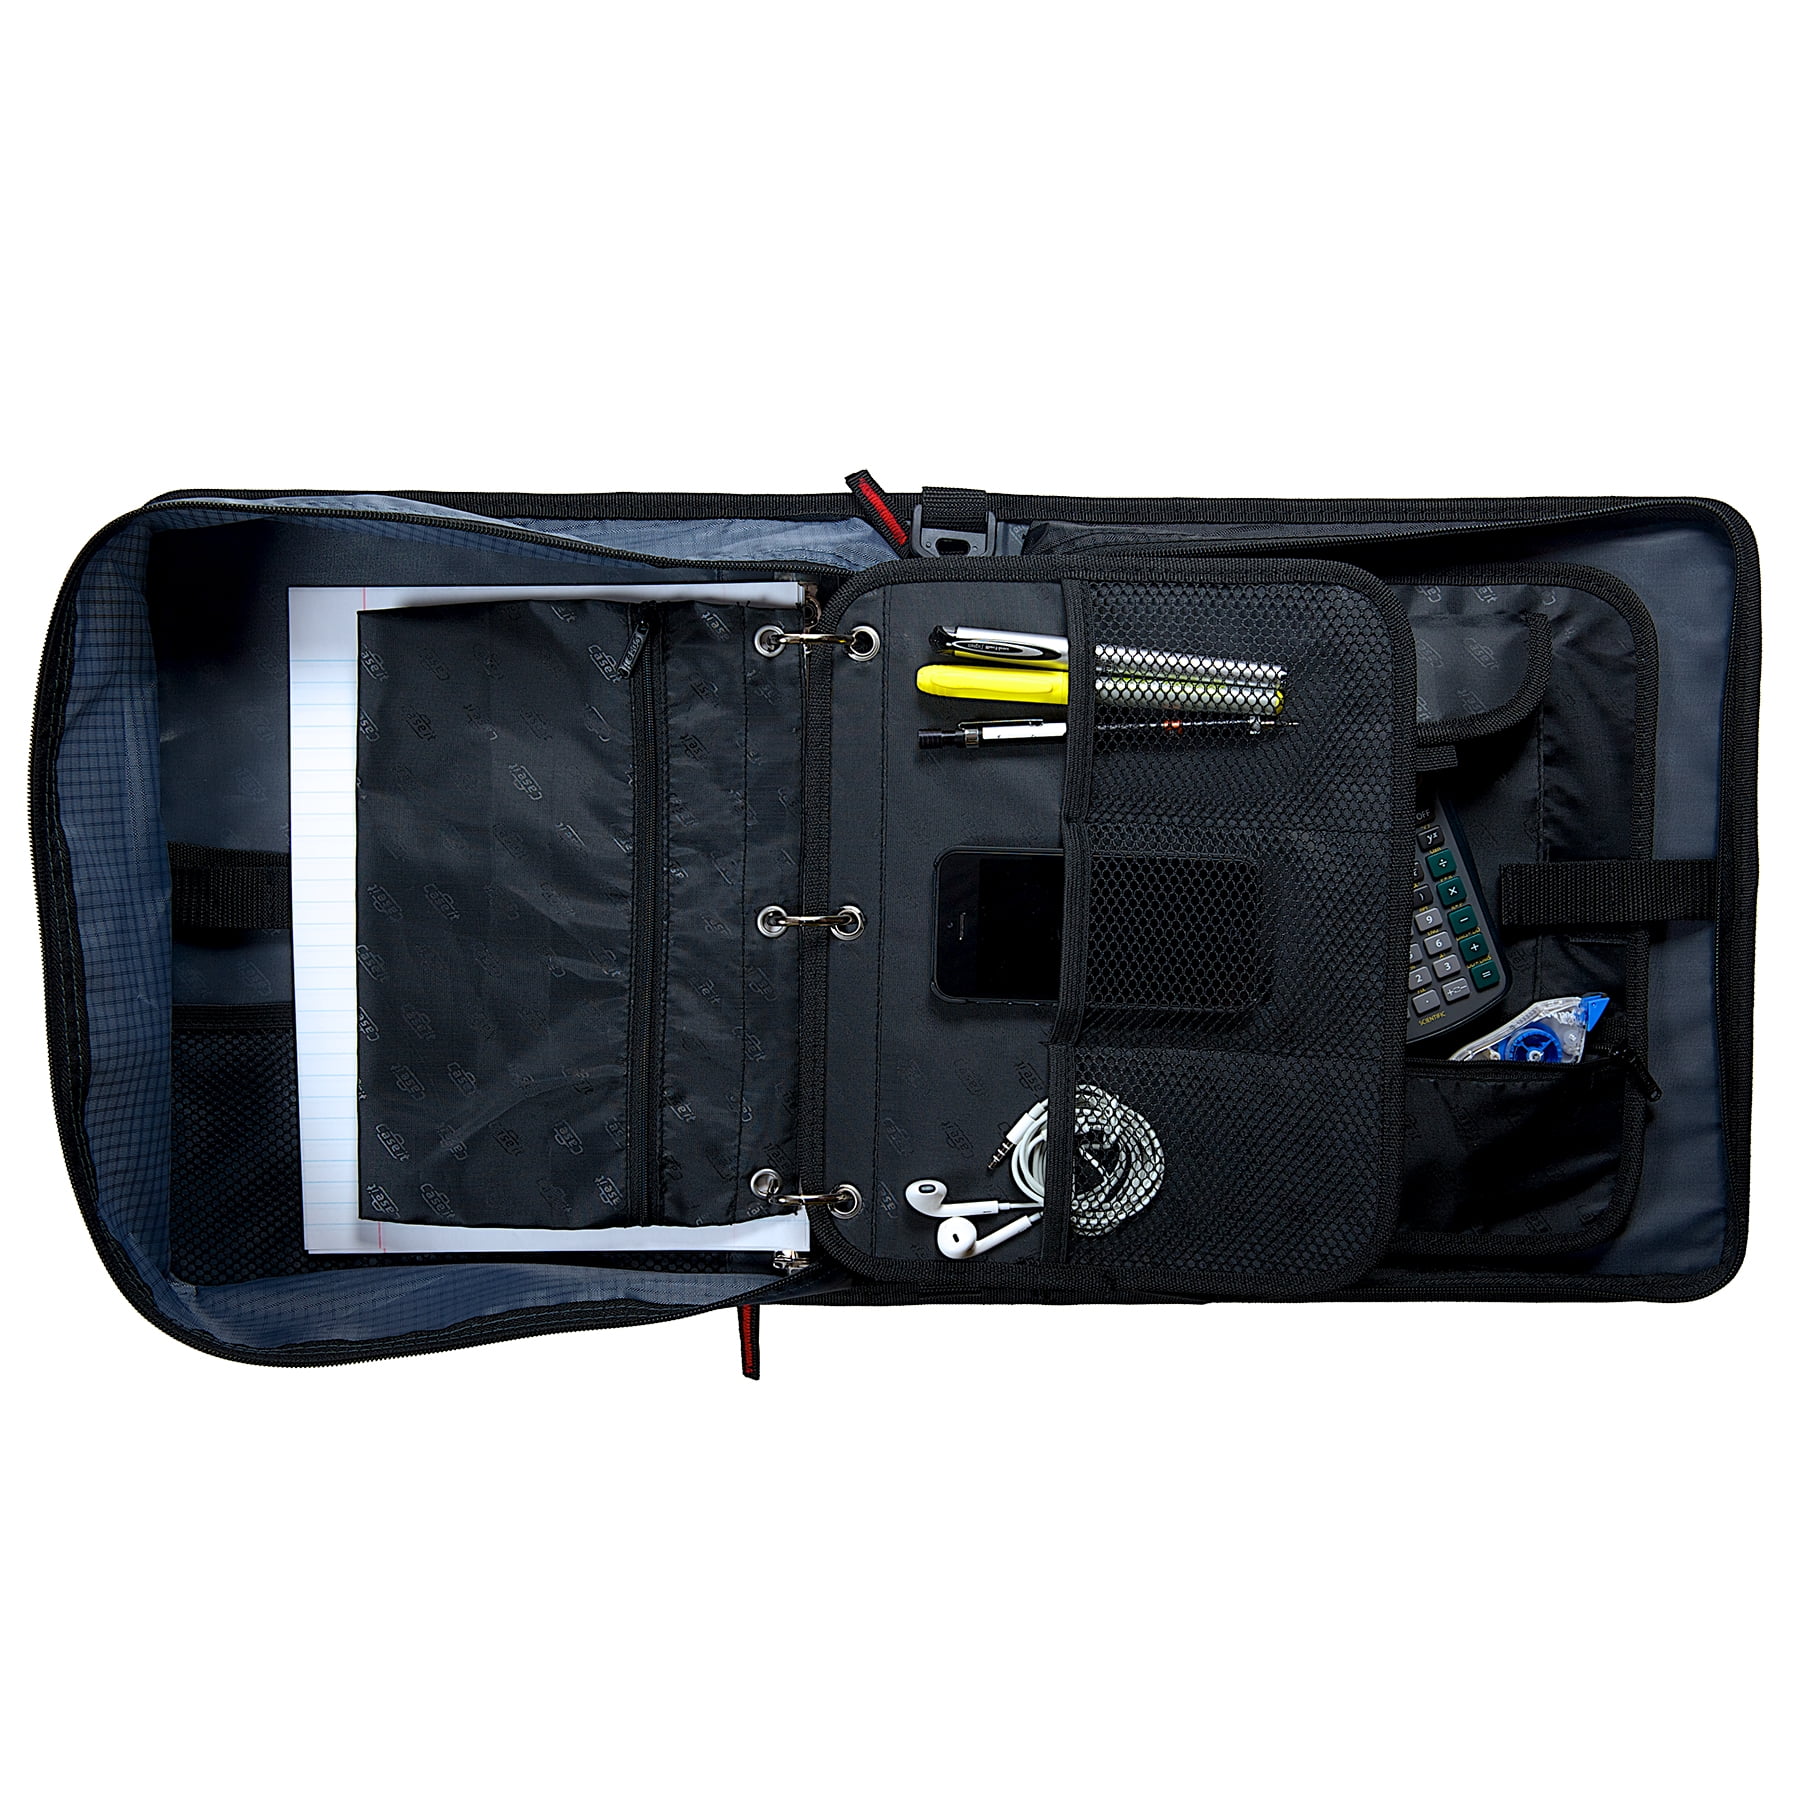 Case•it Dual-121-a, Binder 2-in-1 Zipper Binder, Black, Assembled product  height 13 x depth 3.14 x width 12.99, Handle and shoulder strap